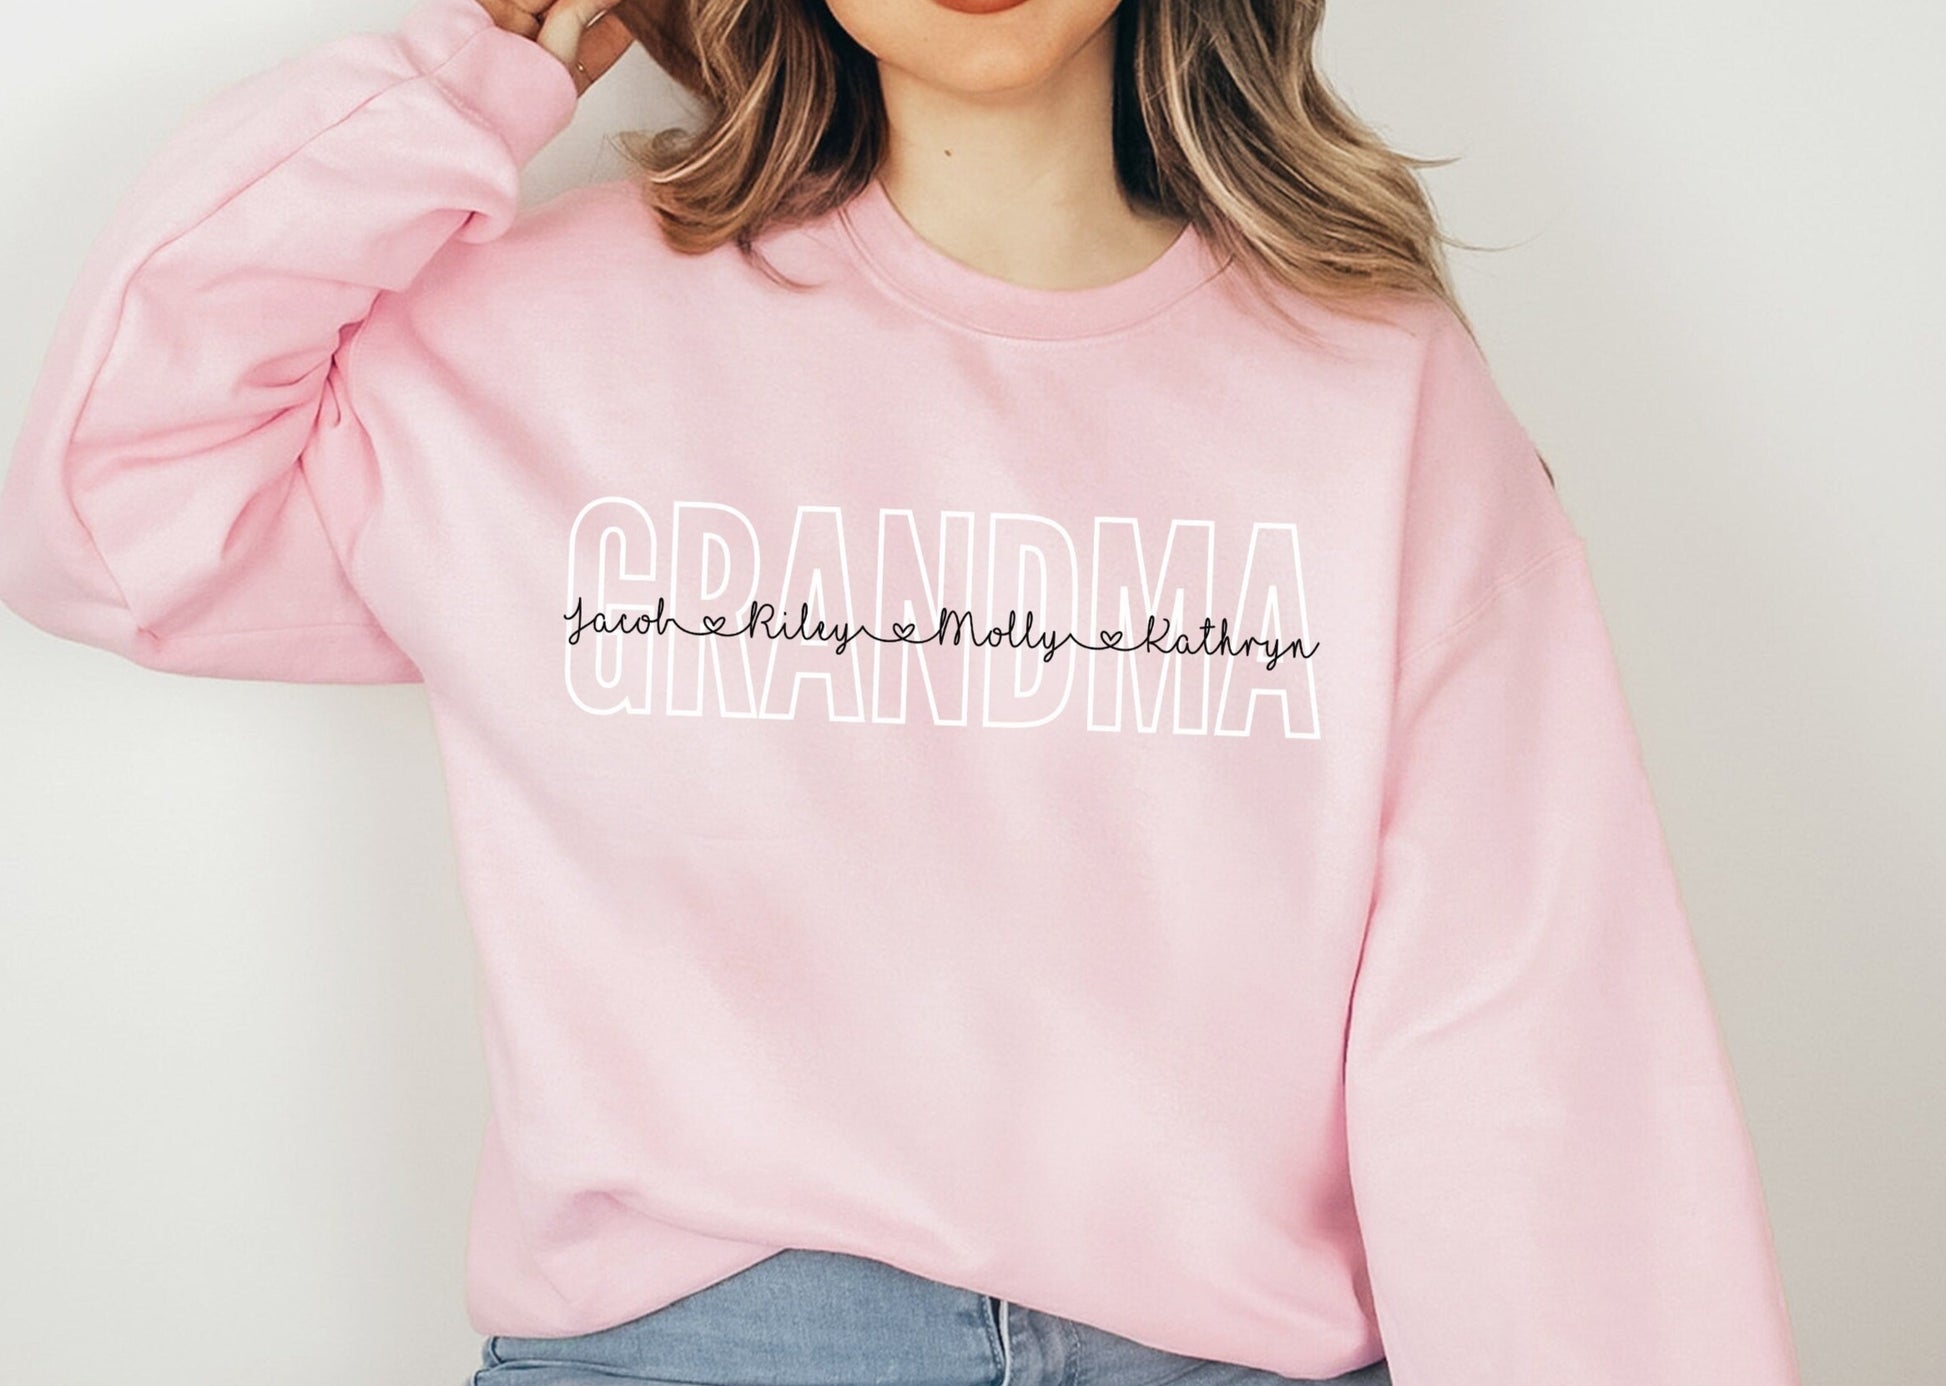 Personalized Gift for Grandma, Custom Shirt with Kids Names, Gifts for Mom, Birthday Present for Nana, Grandmother Sweater Sweatshirt